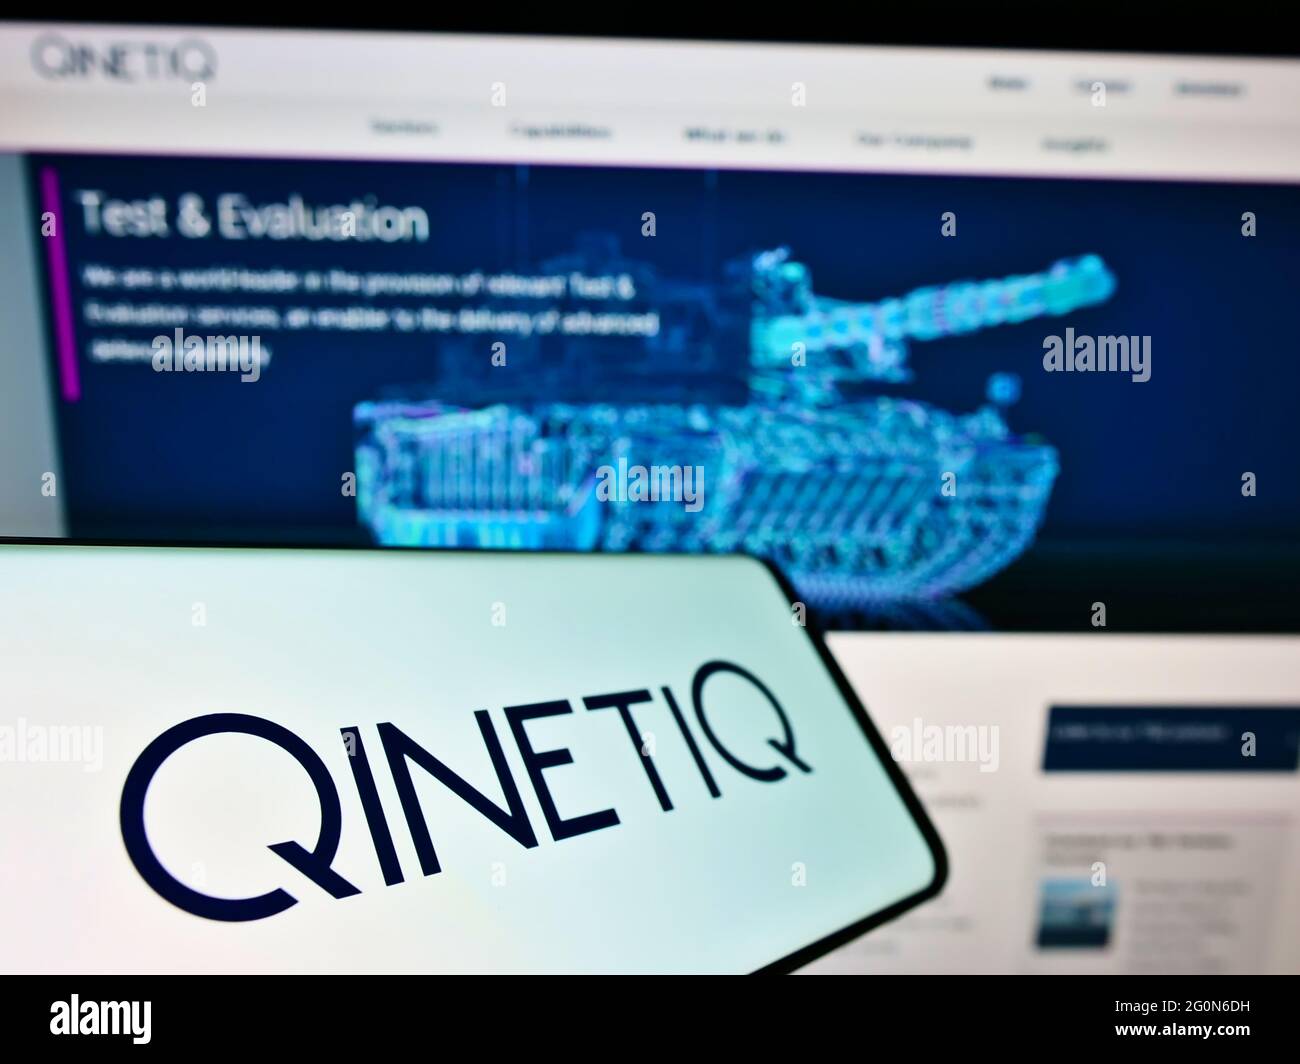 Cellphone with logo of British defence technology company QinetiQ Group plc on screen in front of web page. Focus on center-left of phone display. Stock Photo